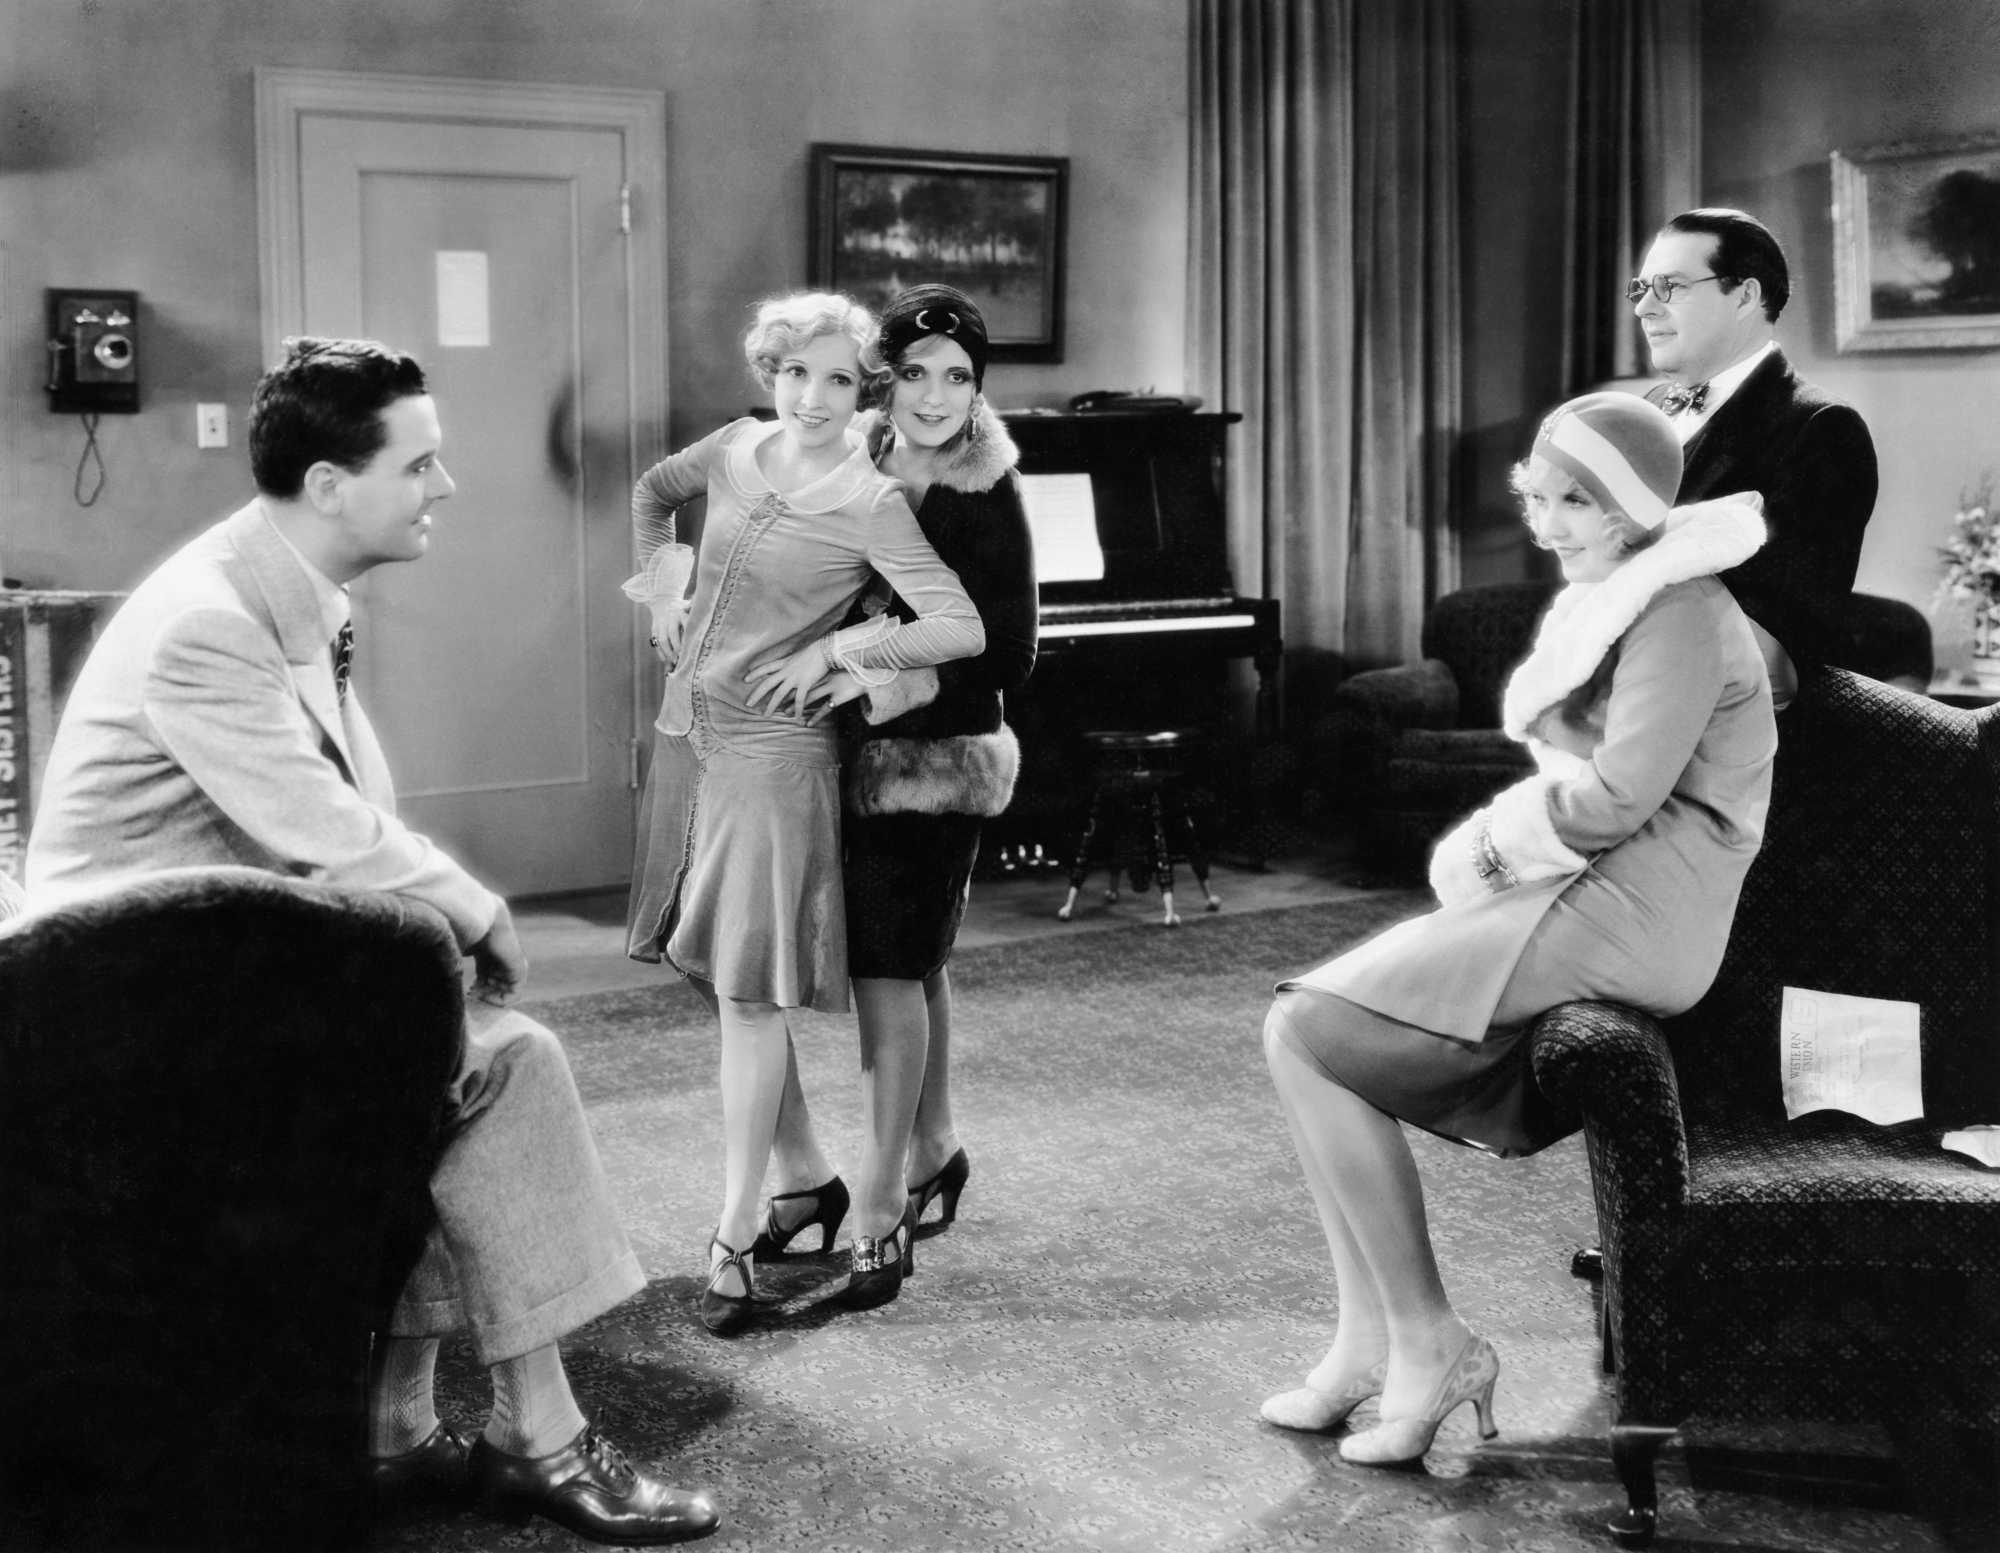 Oscar Best Picture winner ‘The Broadway Melody’ Charles King as Eddie Kearns, Bessie Love as Harriet ‘Hank’ Mahoney, Mary Doran as Flo, Anita Page as Queen Mahoney, and Nacio Herb Brown as Pianist dancing in a black-and-white picture